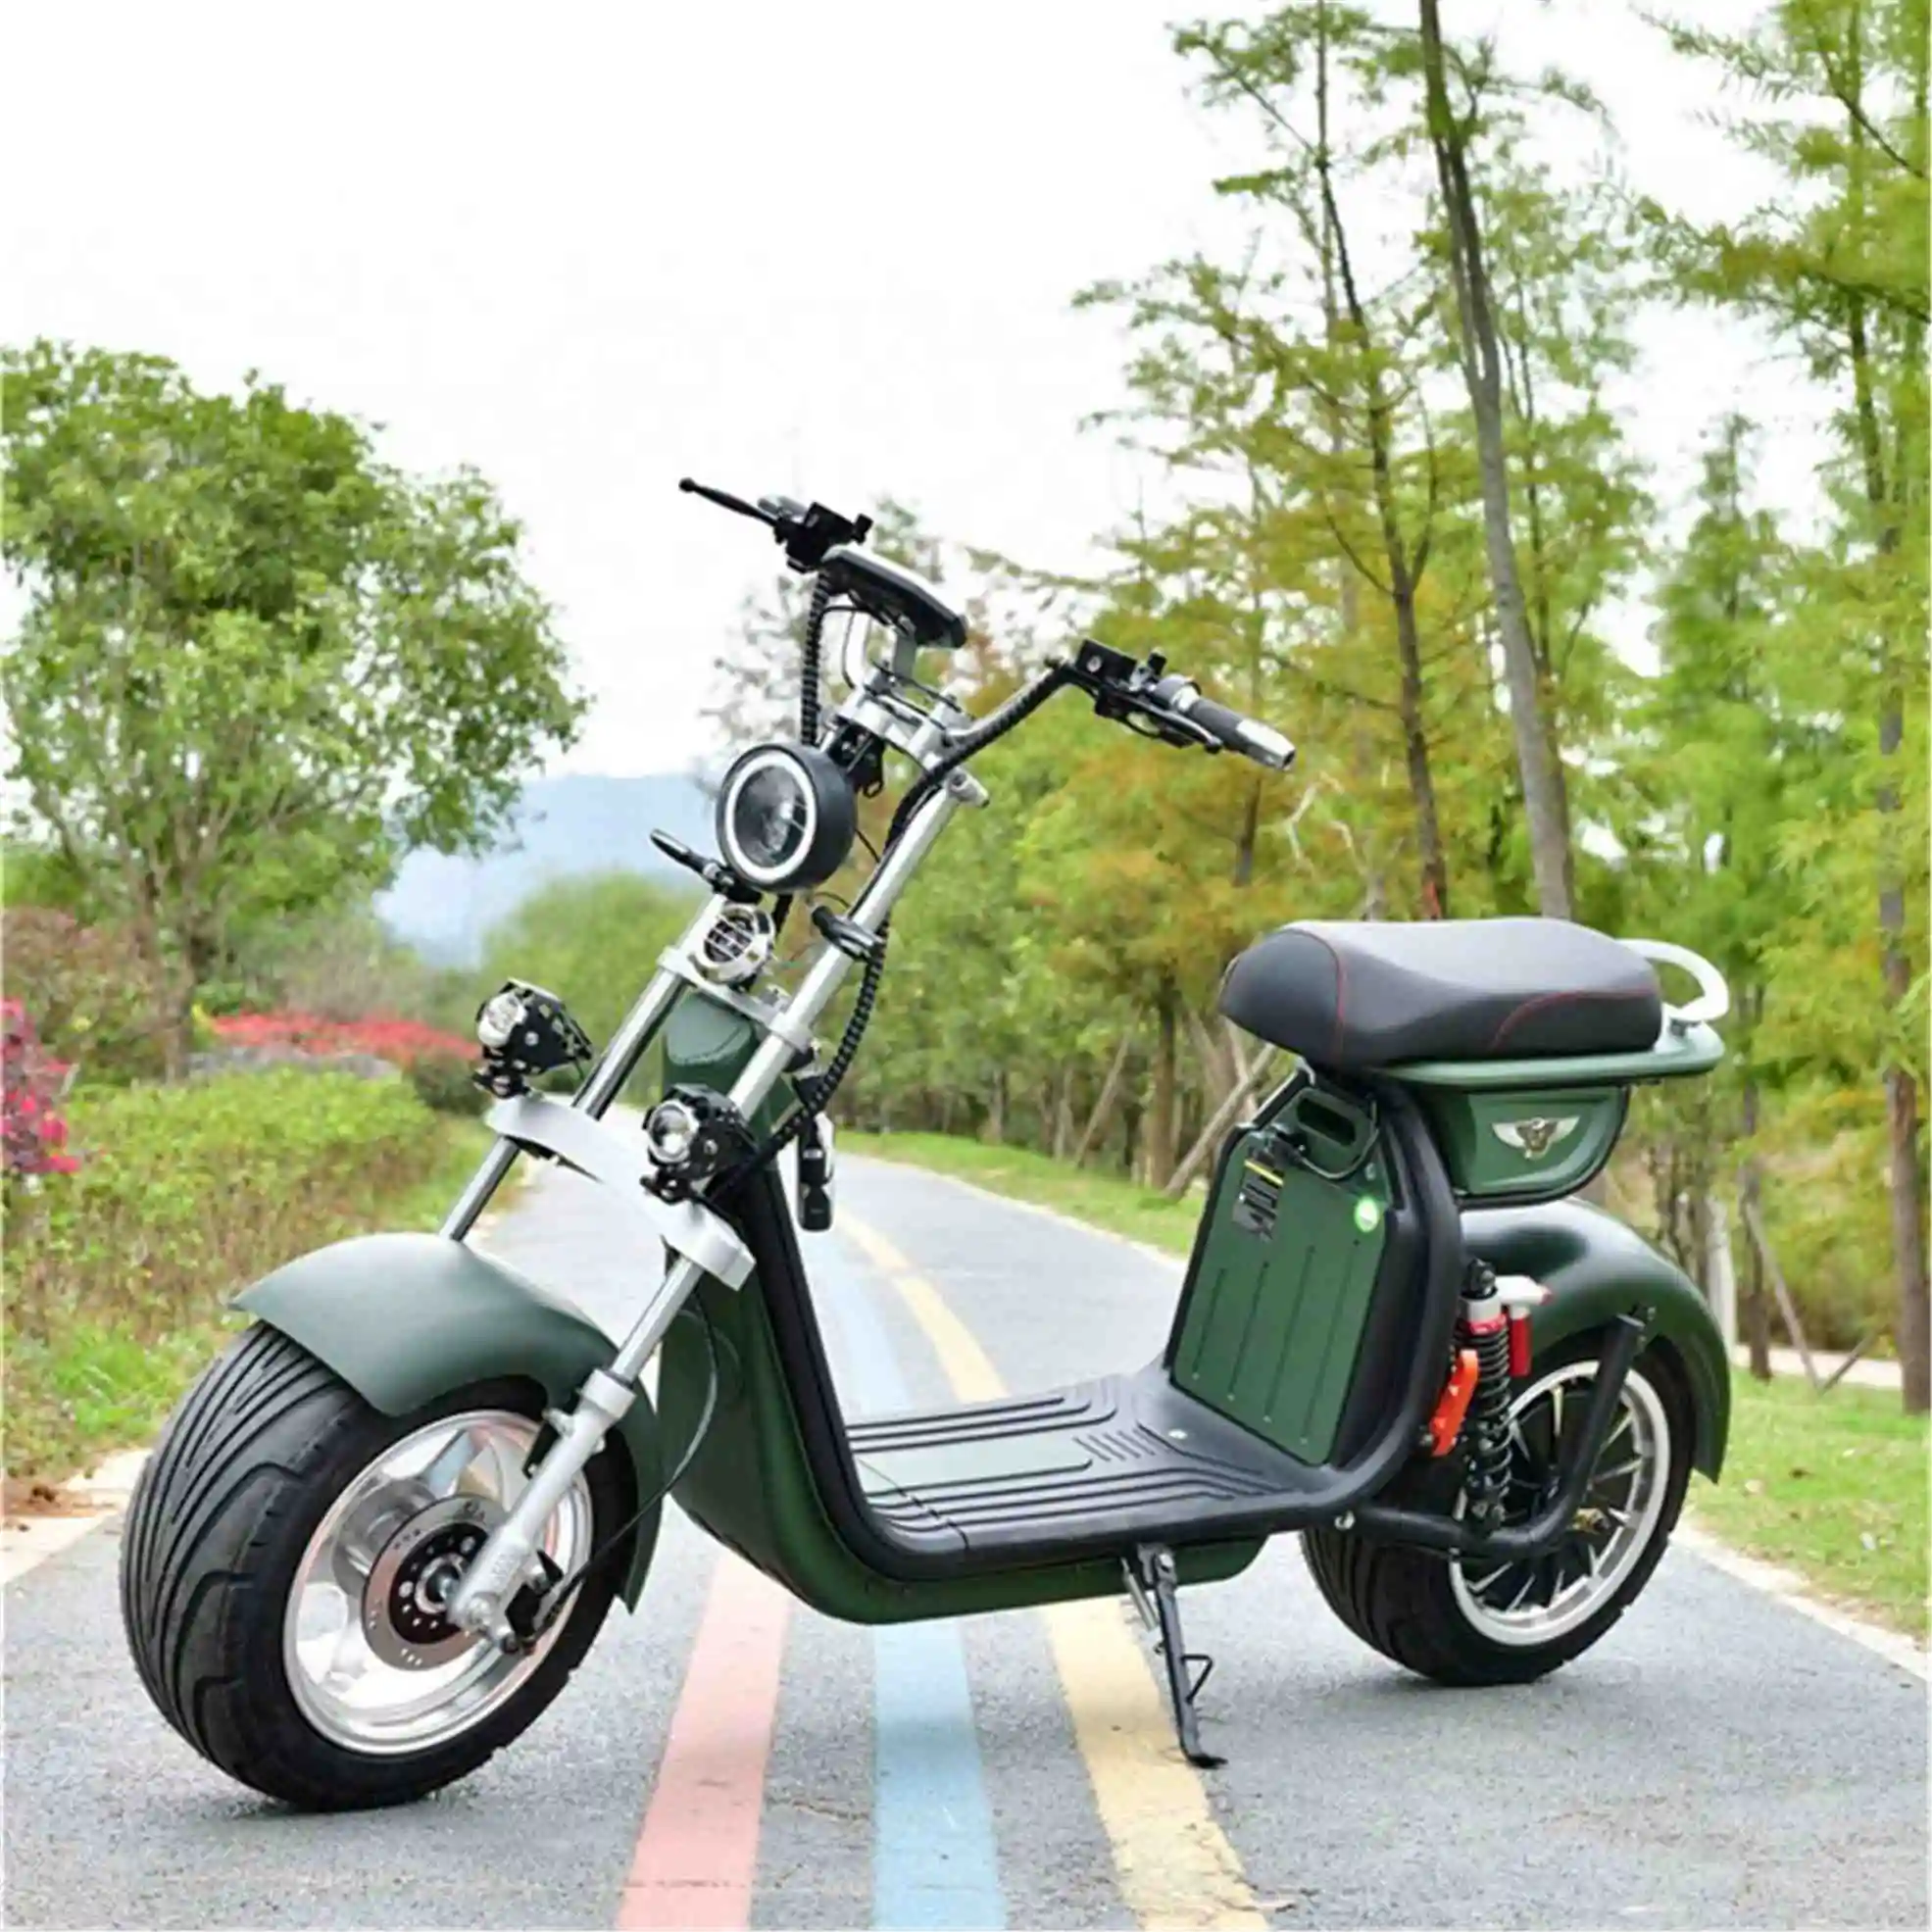 

EU Warehouse Citycoco Scooter Electrico 60V 1500W Fat Tyre Adult 2000W Citycoco Off Road Electric Scooter, Black